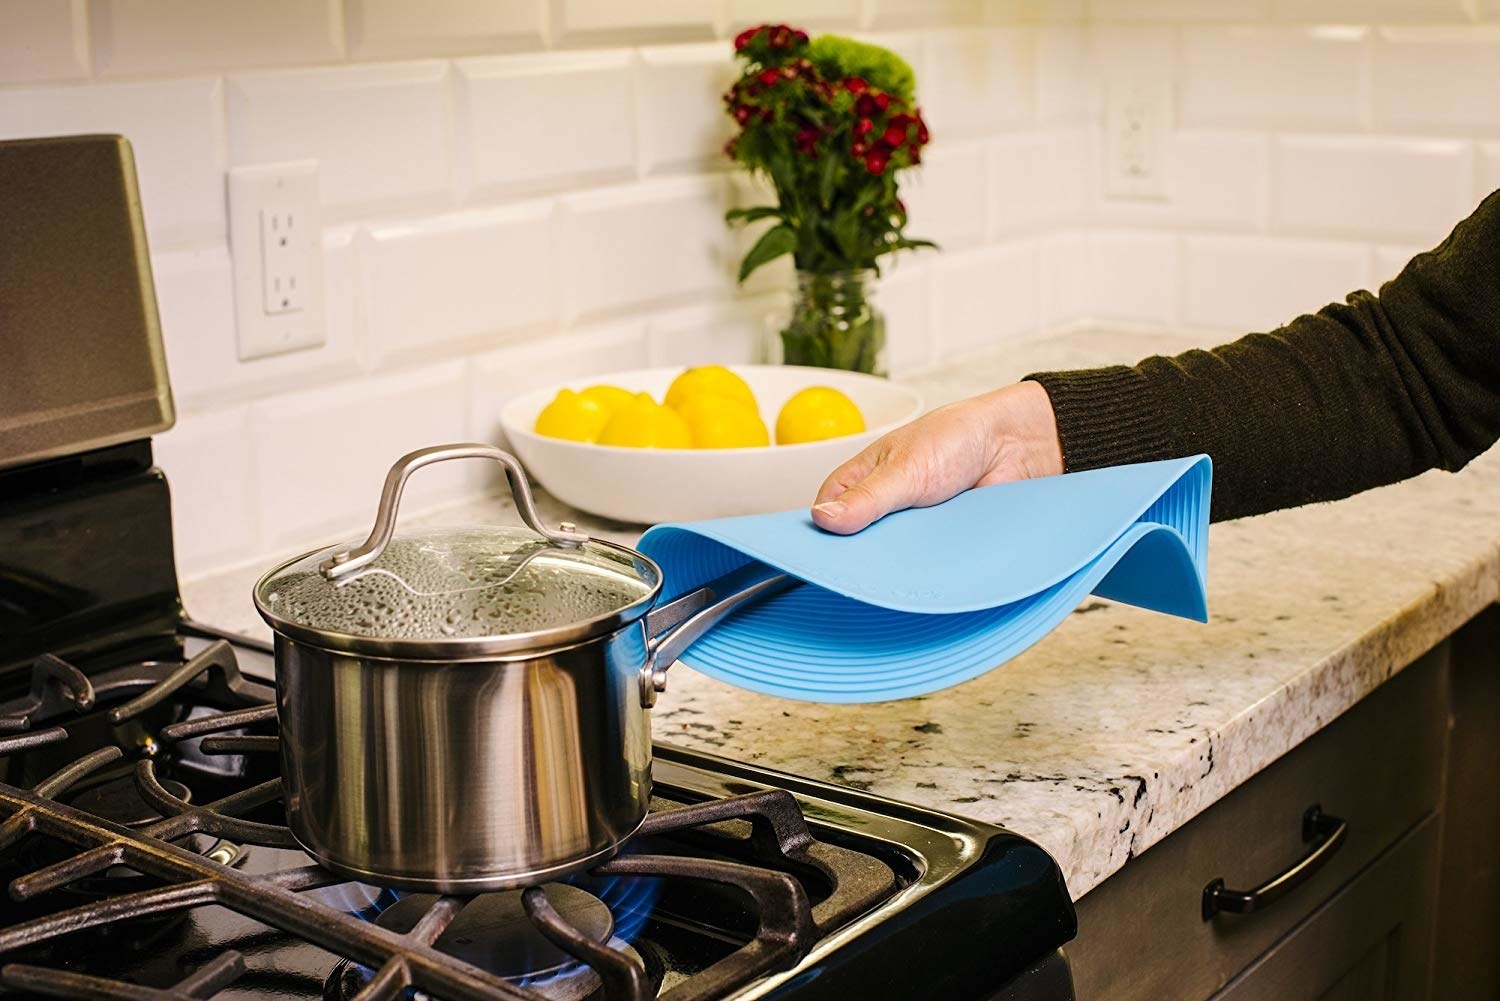 5 Absurd As Seen On TV Products (That Are Secretly Useful)